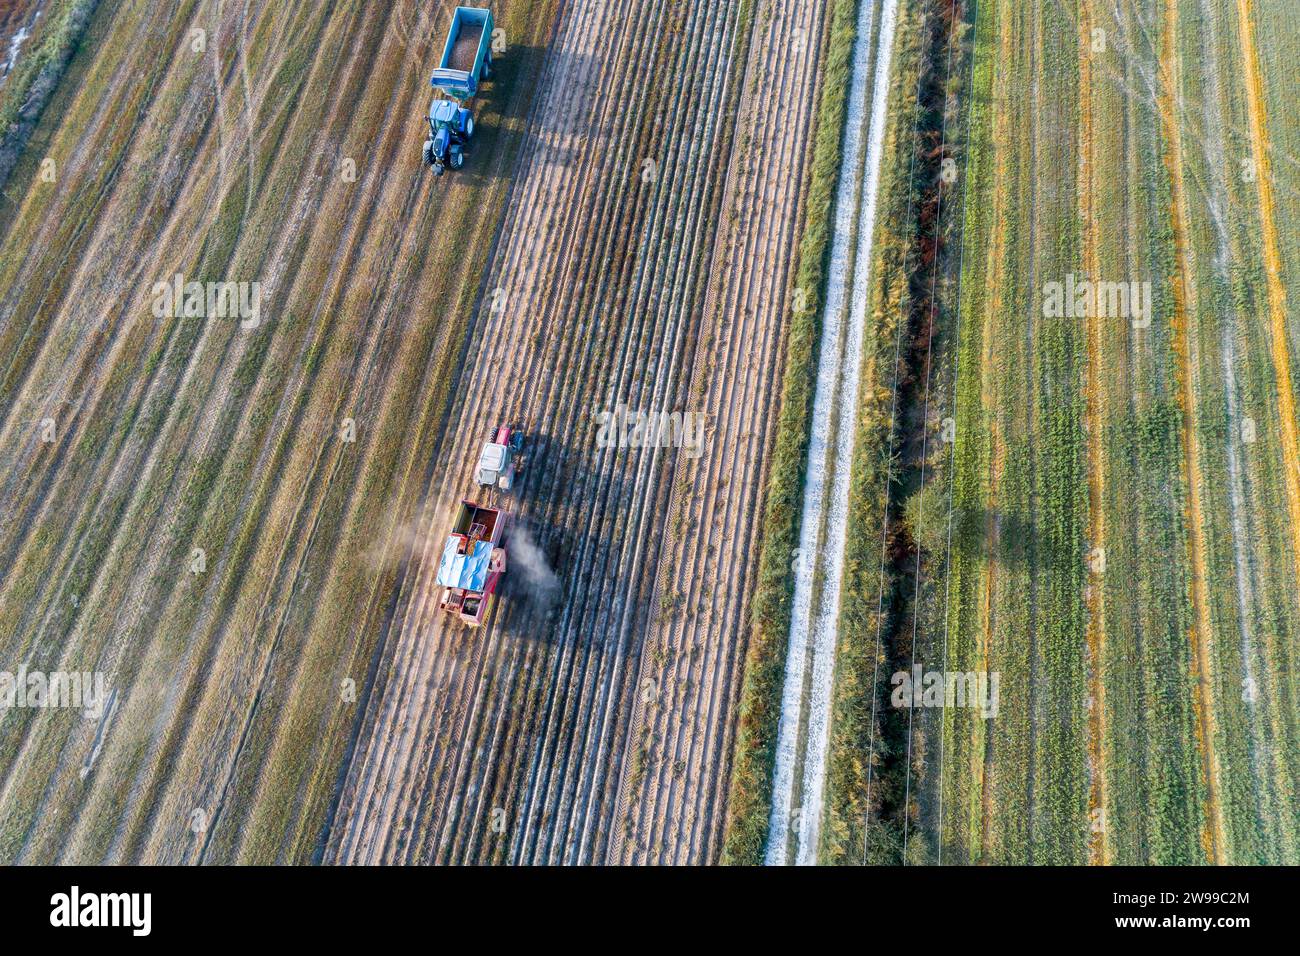 drone view of agricultural machinery working in the potato harvest Stock Photo